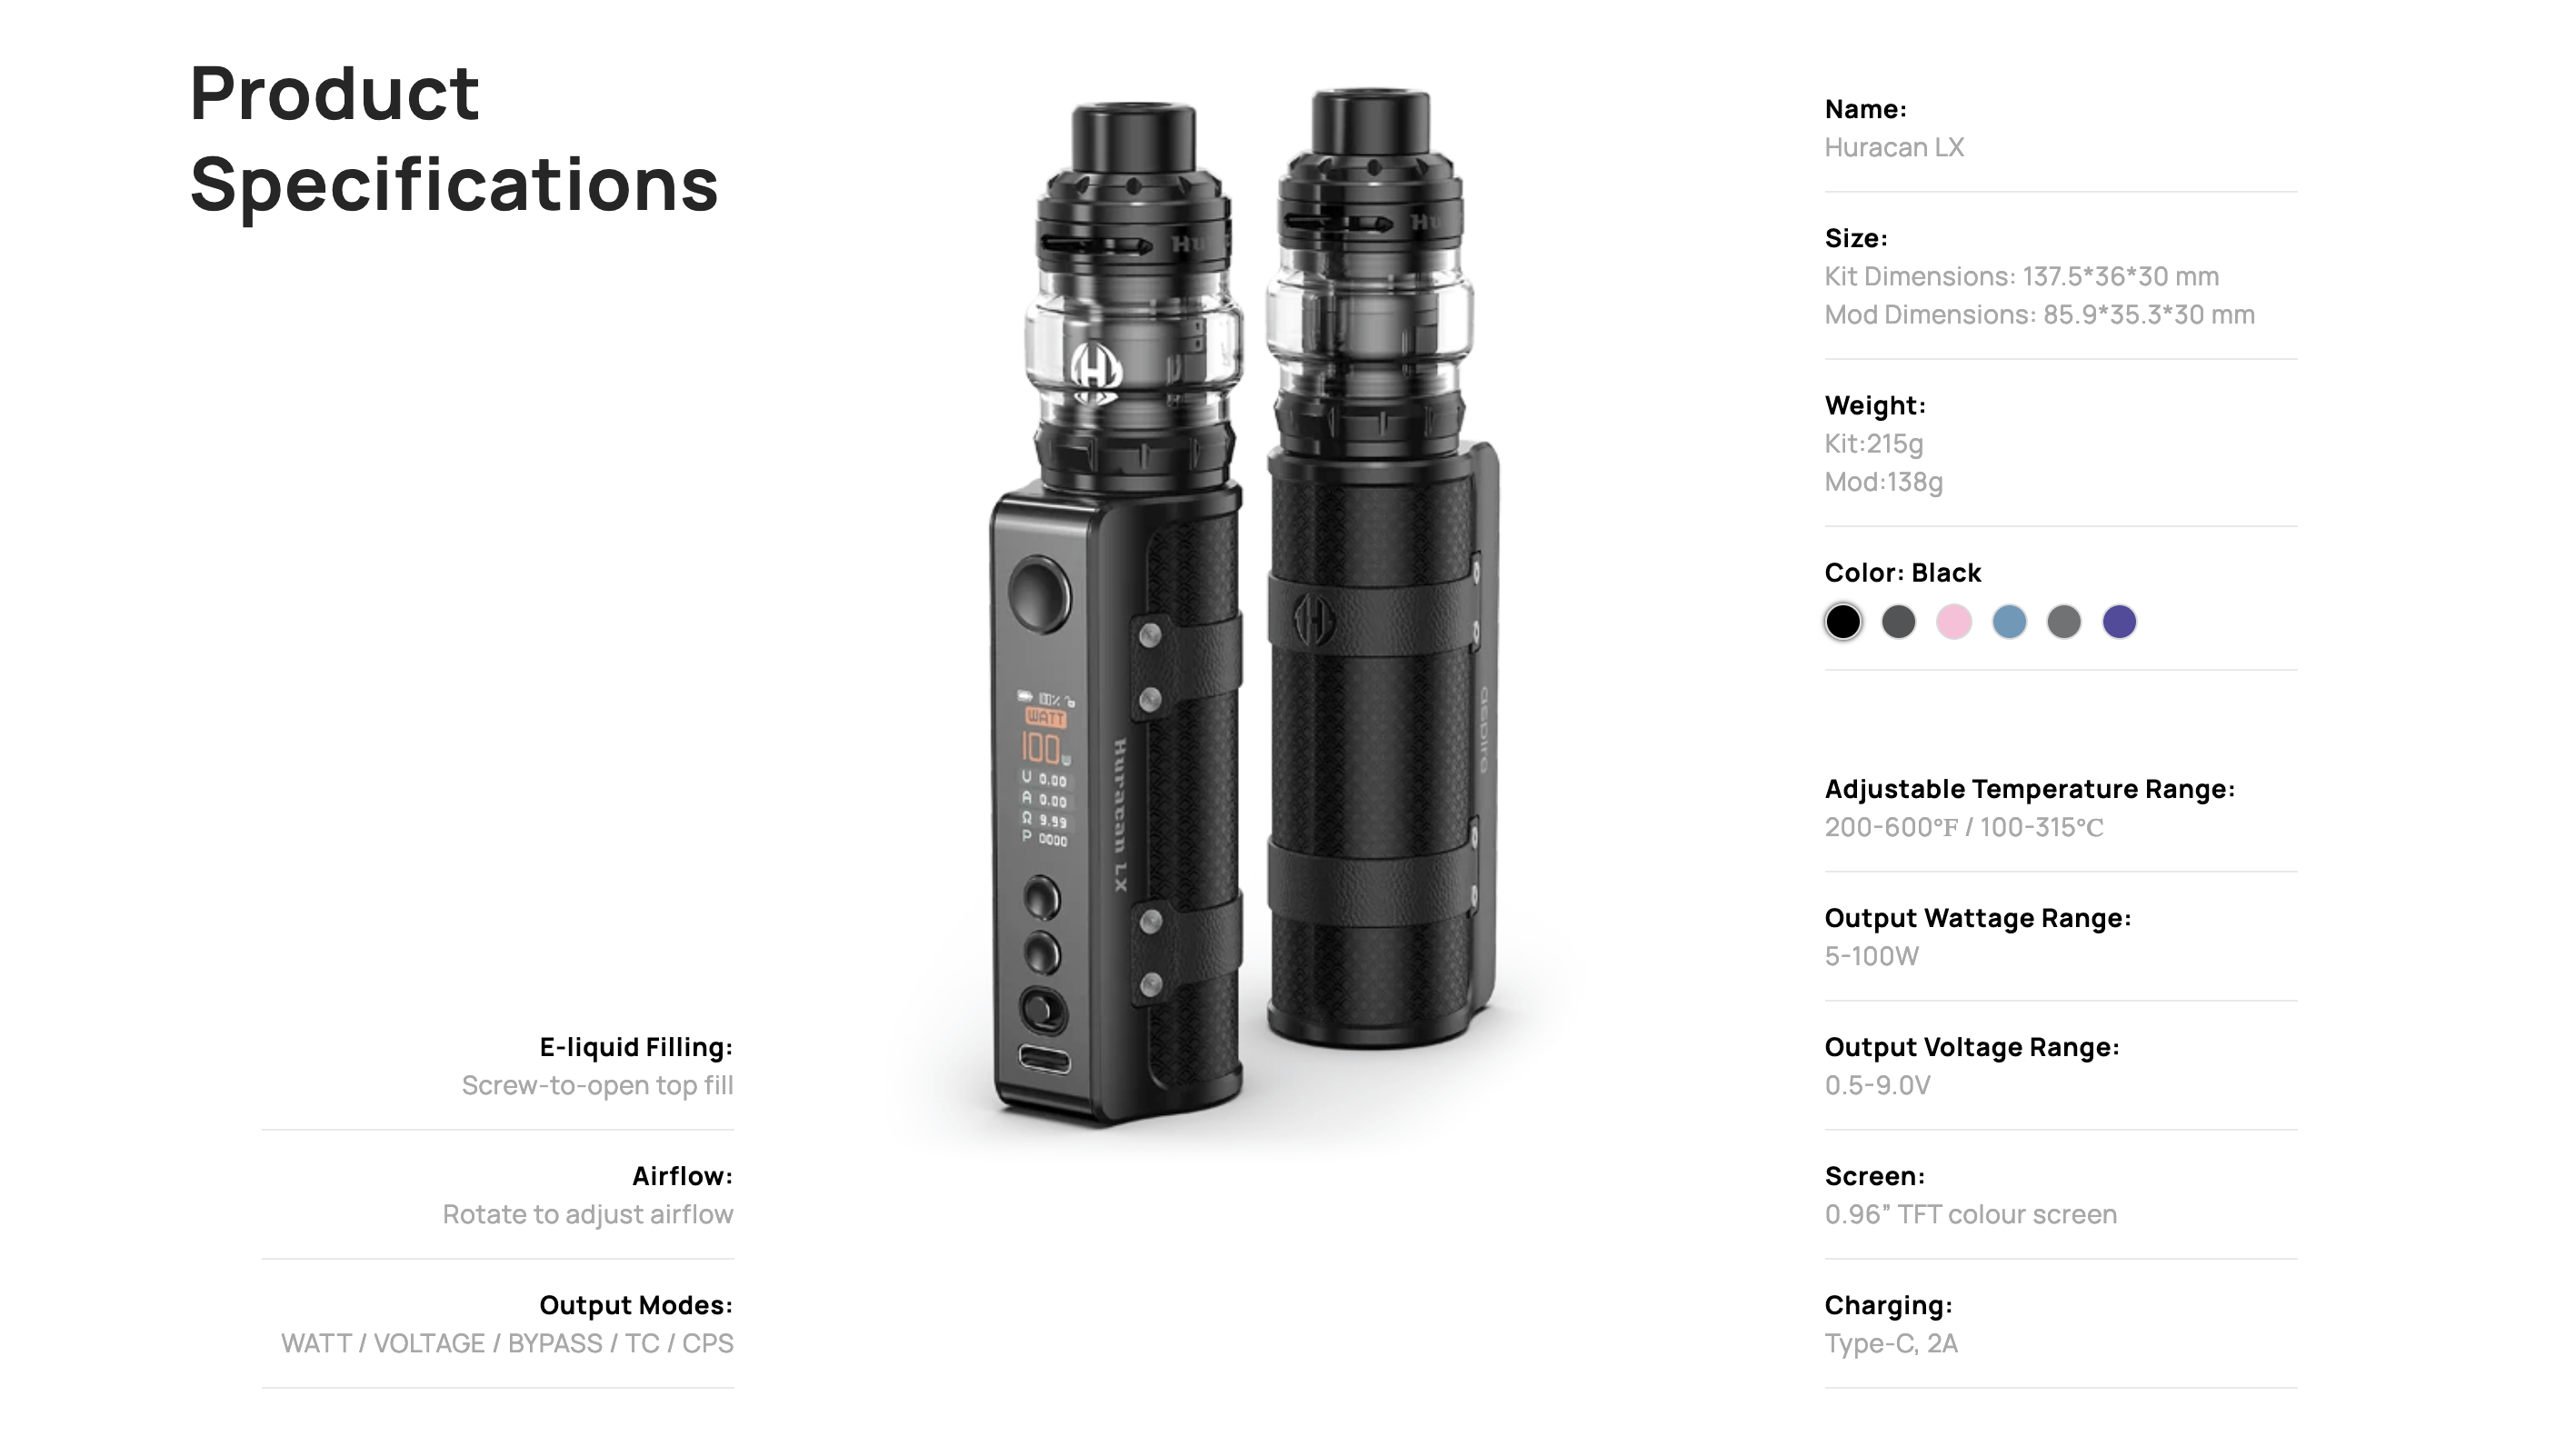 Aspire Huracan LX - Product Specifications